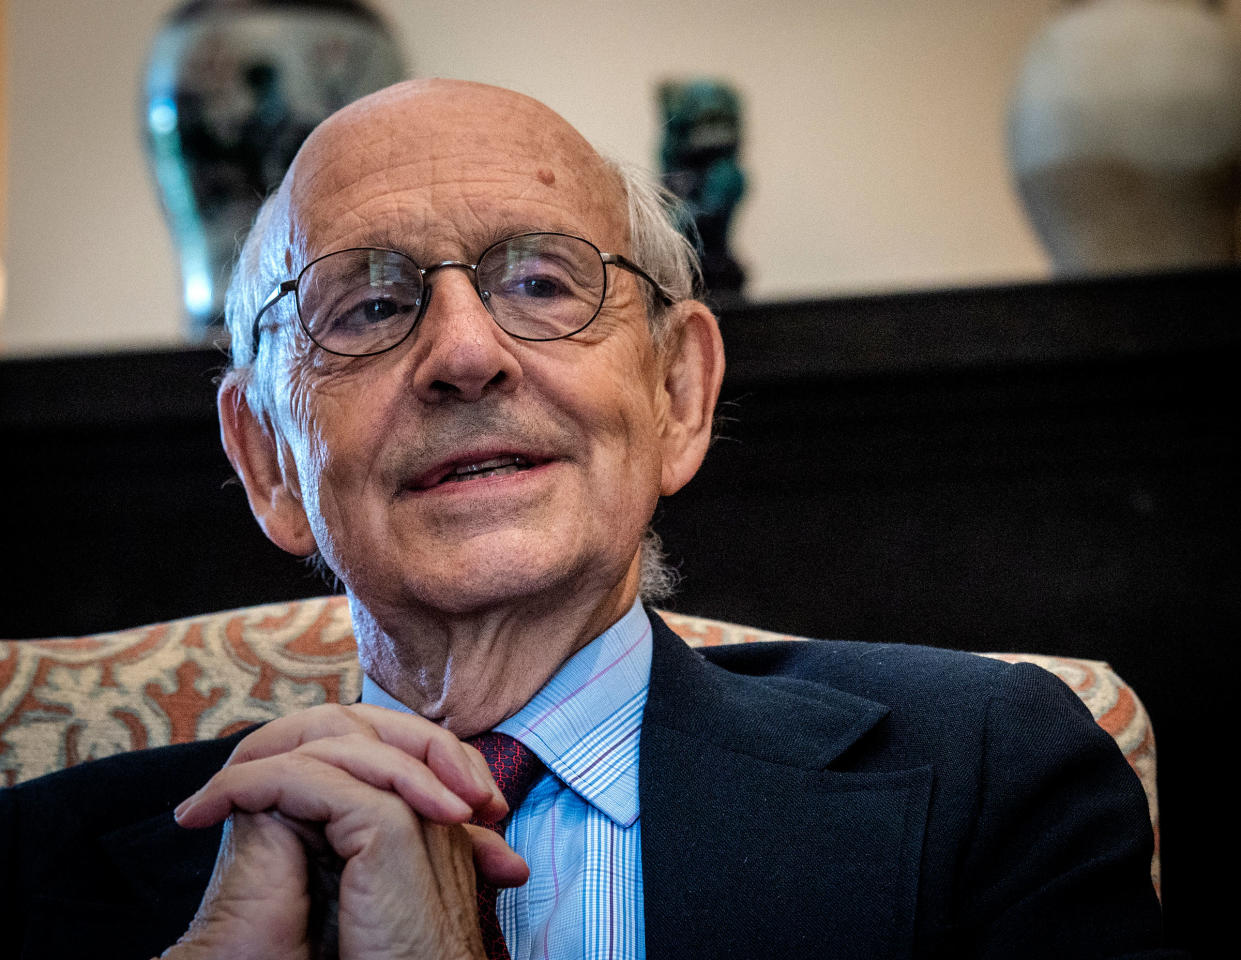 Supreme Court Justice Stephen Breyer during our interview in his office on August 27 in Washington, DC.